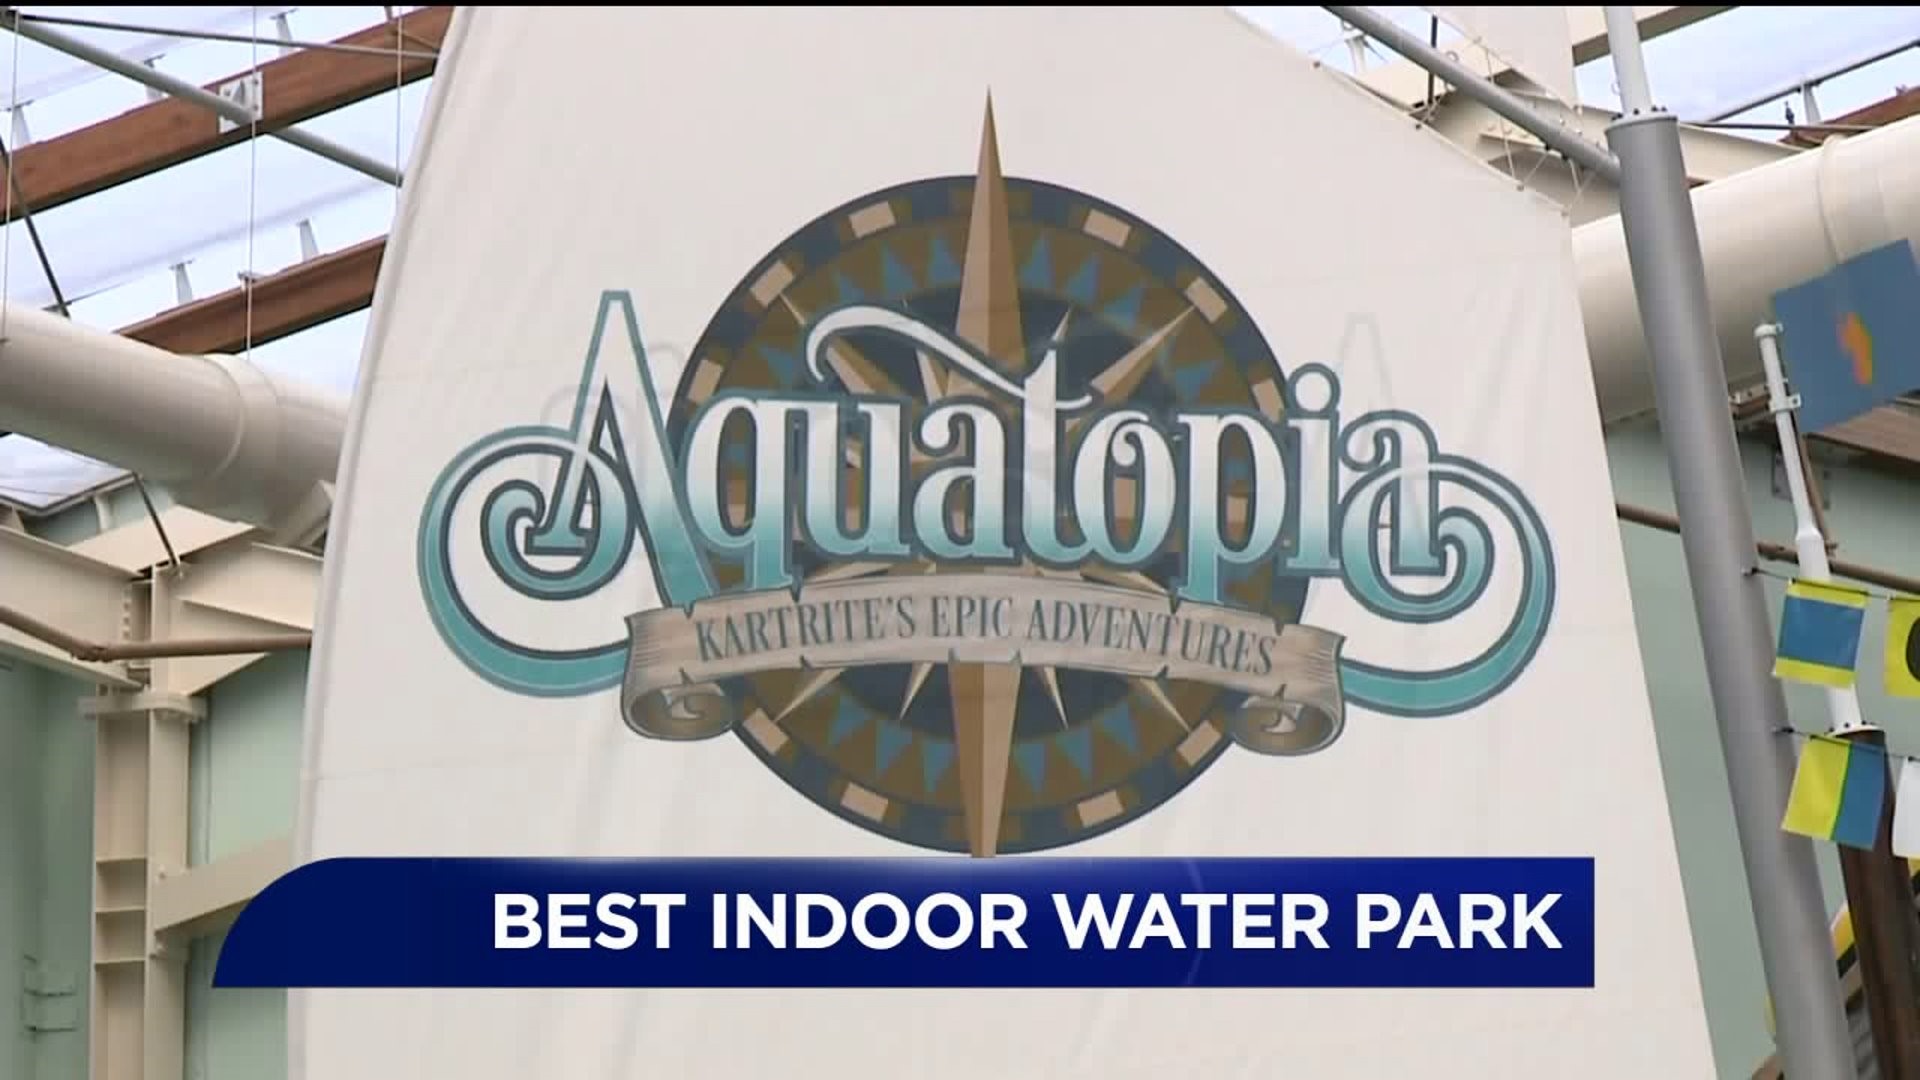 Area Water Park Named Best by USA Today